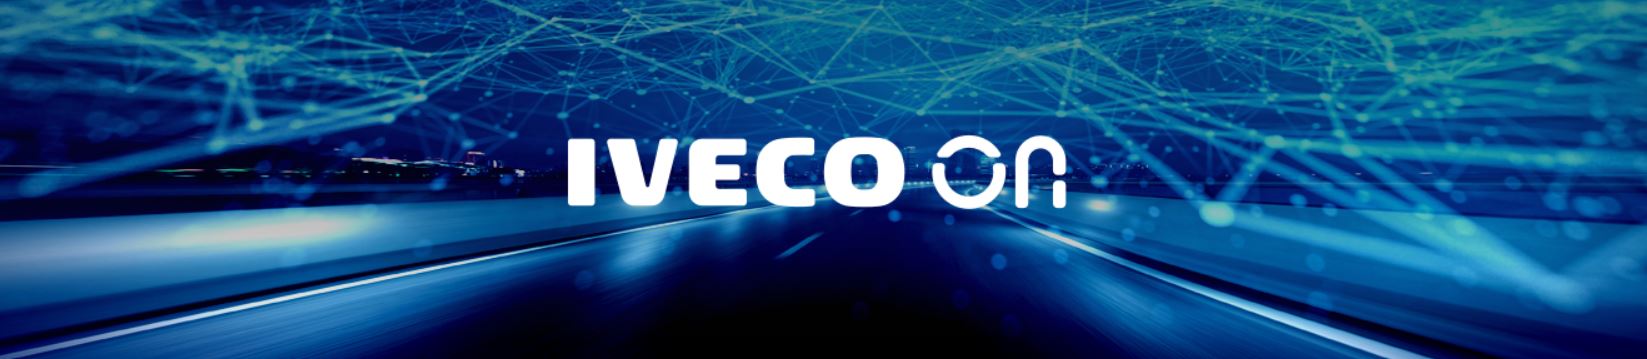 iveco on